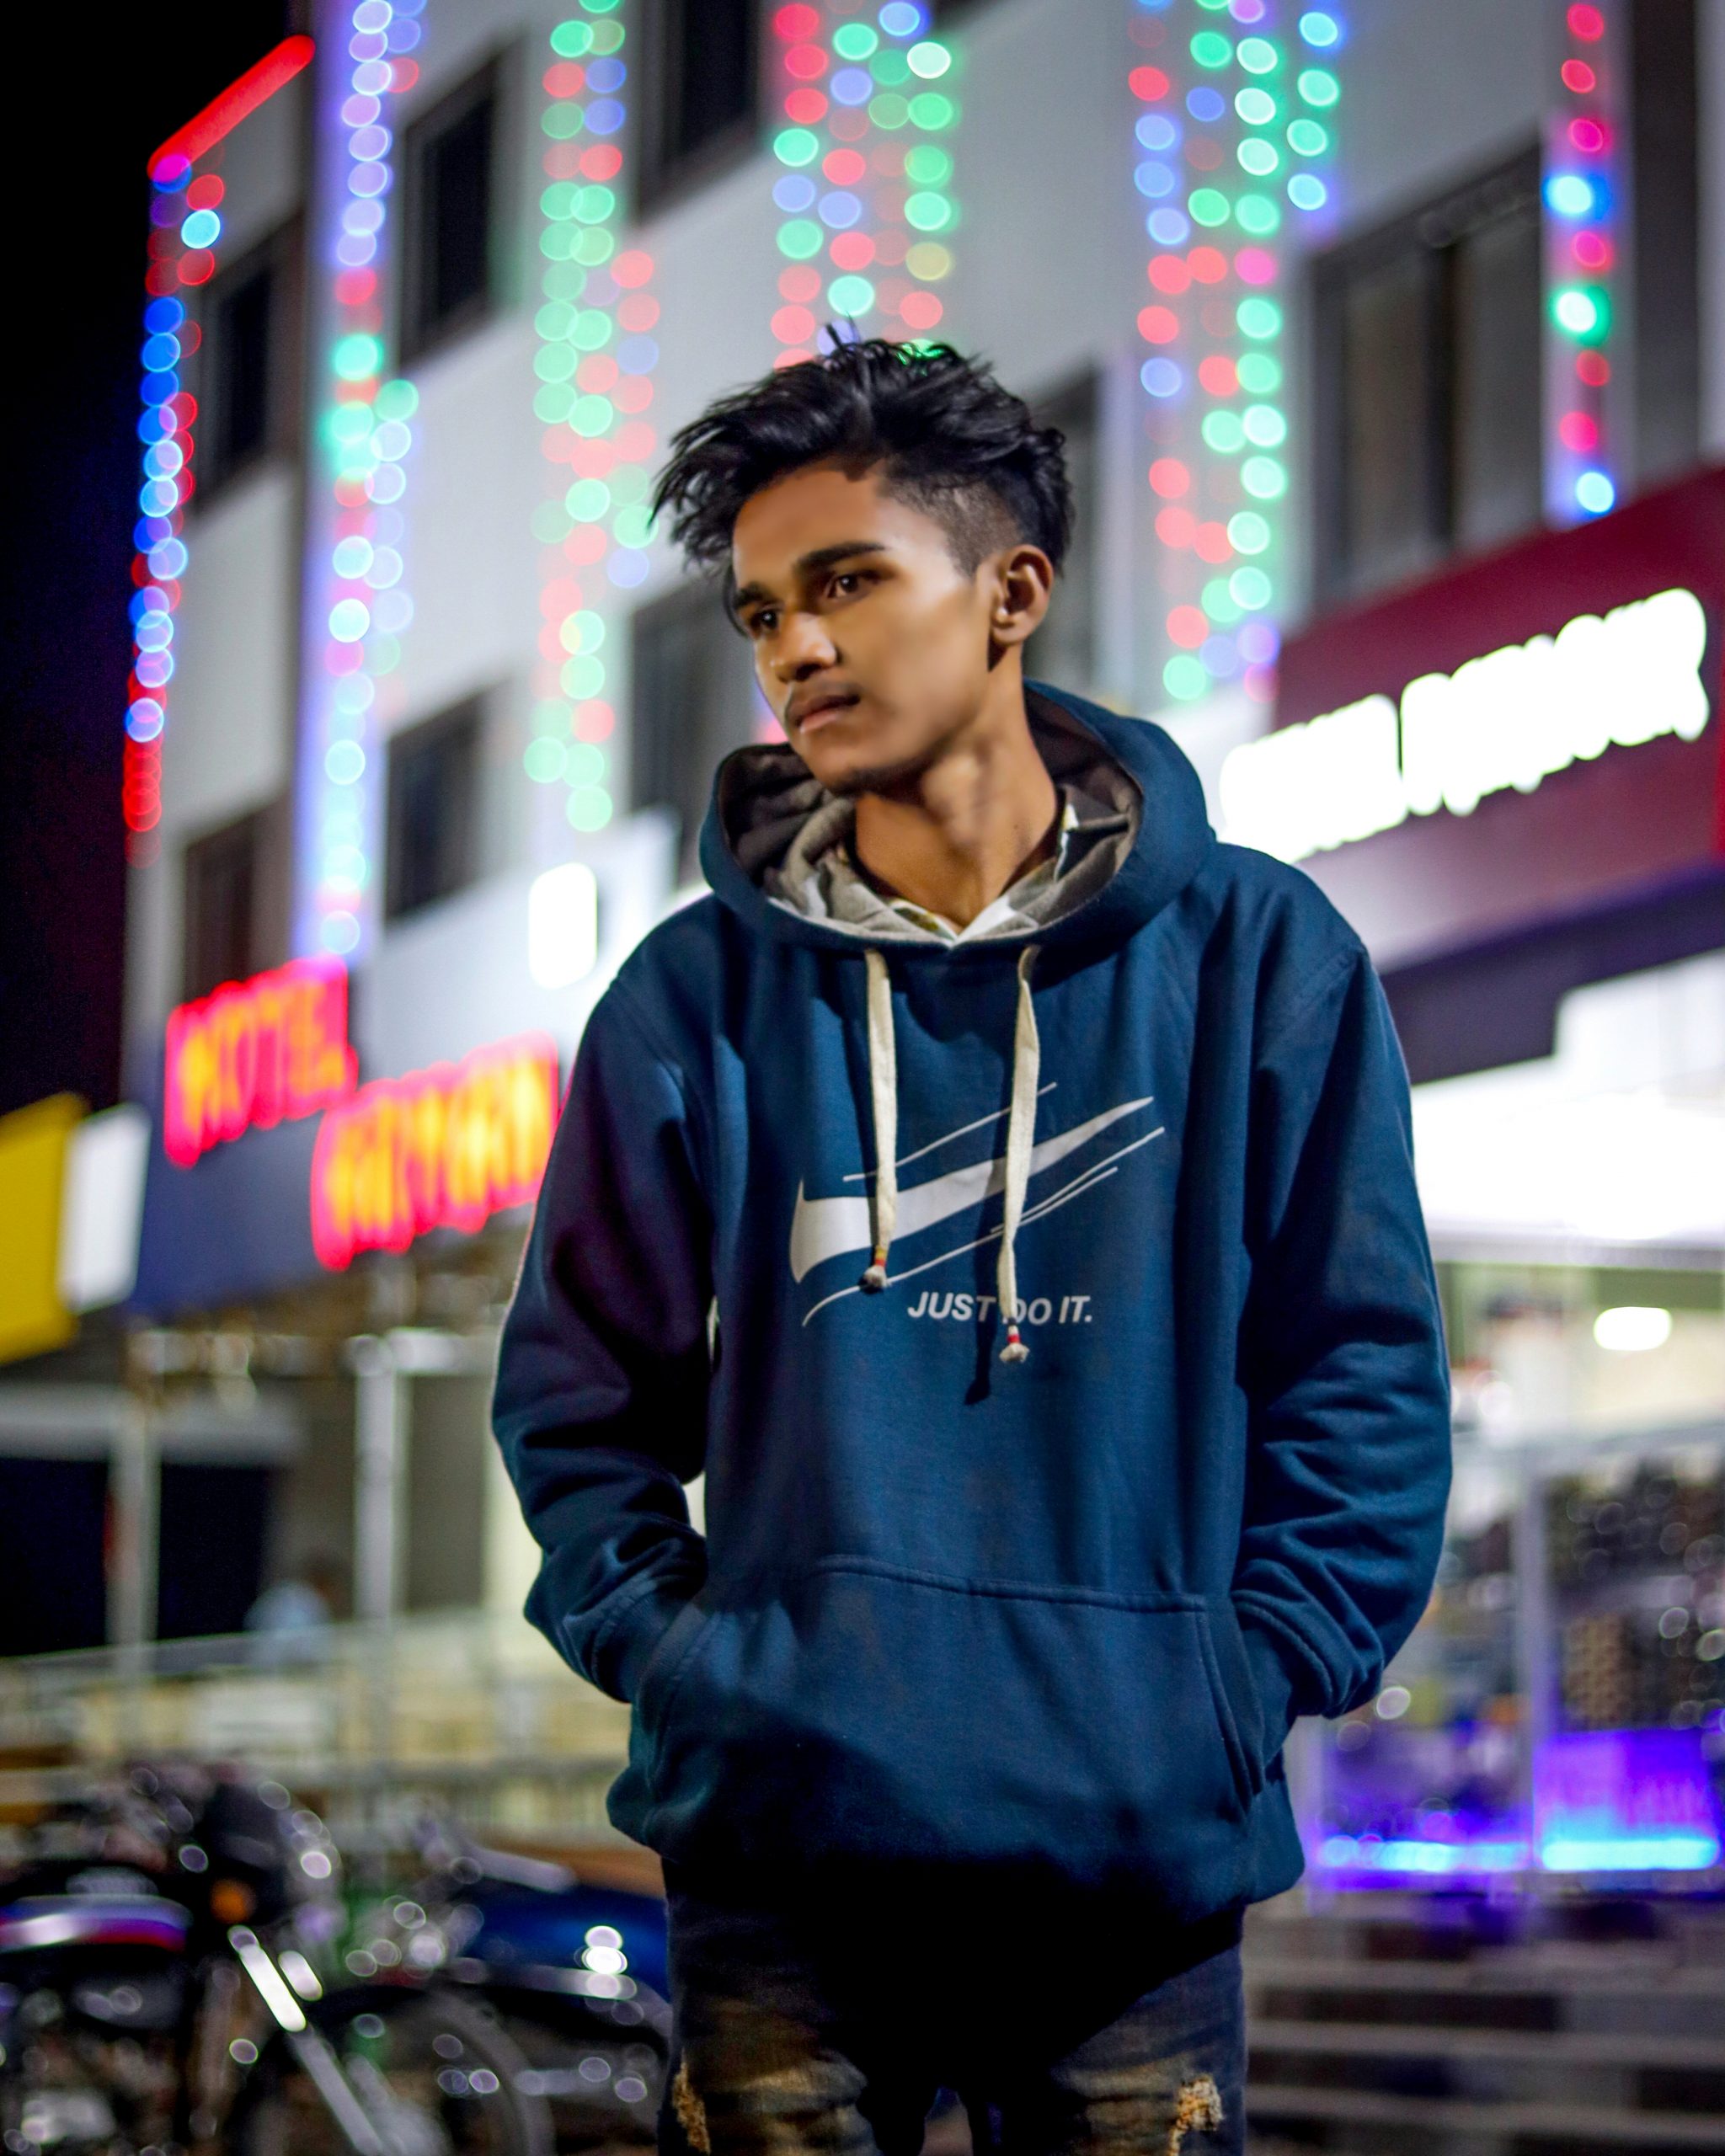 Boy posing outside building at night